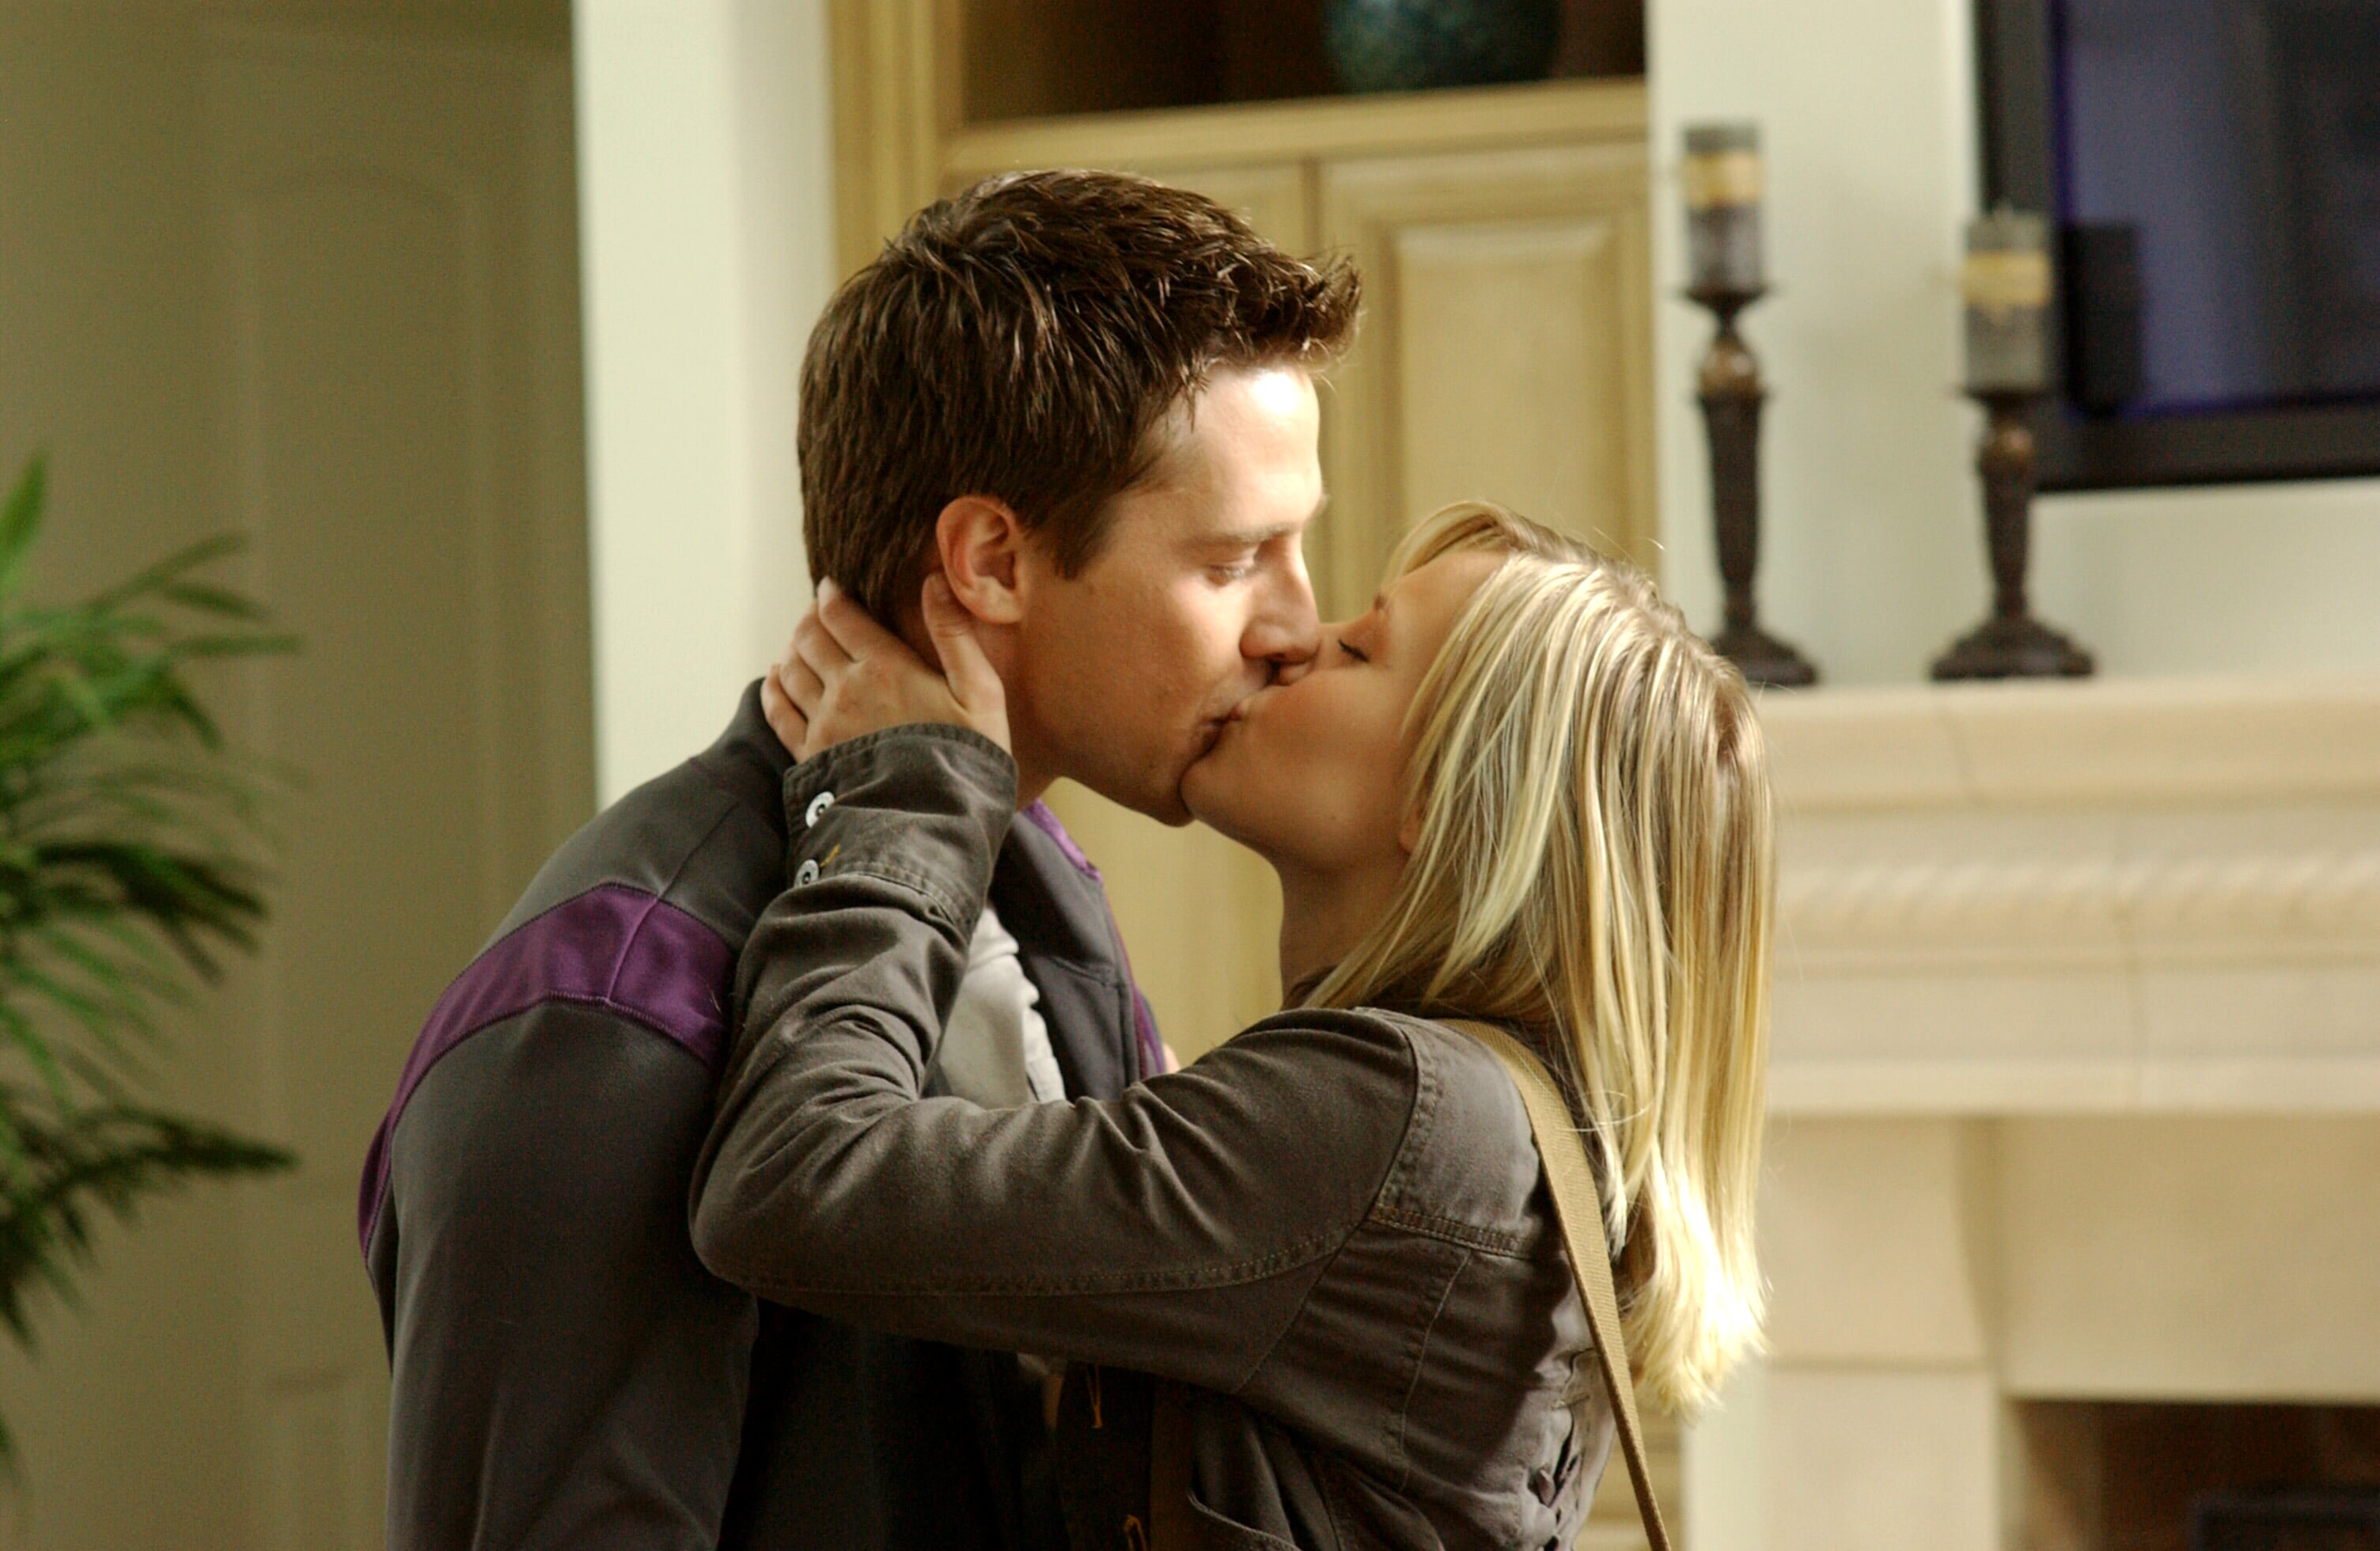 15 of TV's Most Memorable First Kisses